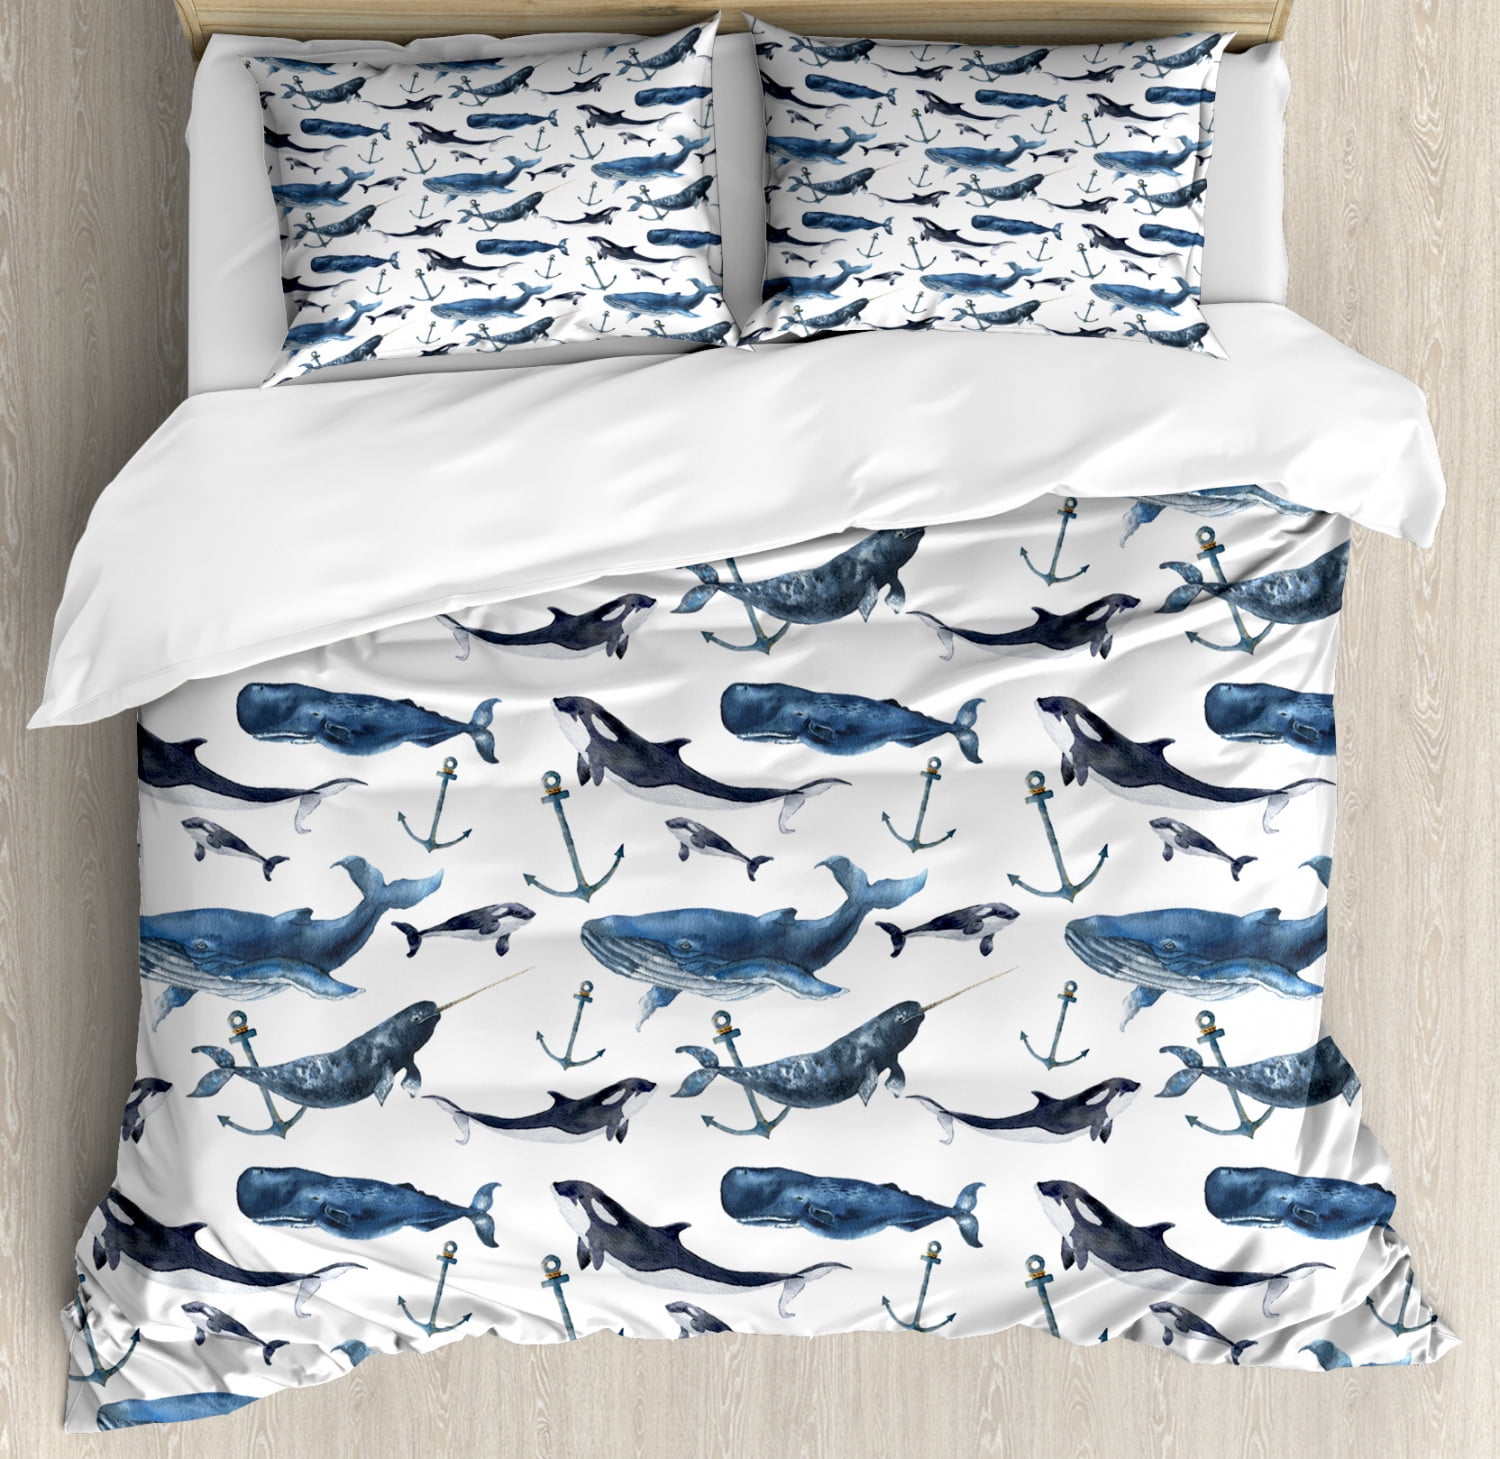 Narwhal Pattern Luxurious Duvet Cover Sets Bedding Sets Single Double King Sizes 